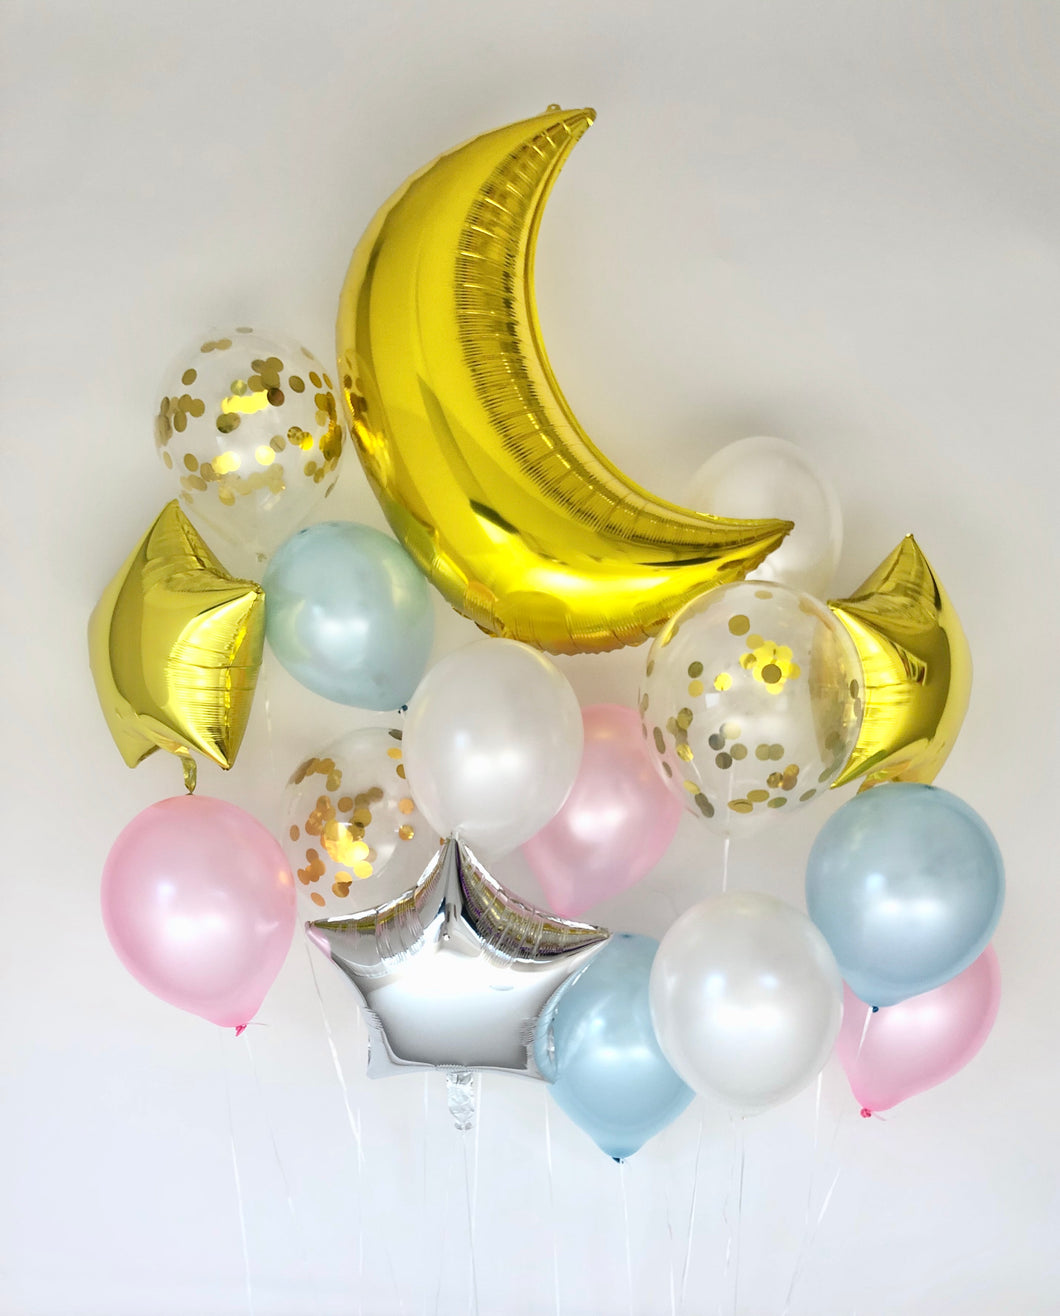 Sweet Moon 16 Piece Moon and Star Balloons Bouquet - Baby Shower, Birthday, Gender Reveal, Eid, and Ramadan Party Decoration (Blue & Pink)